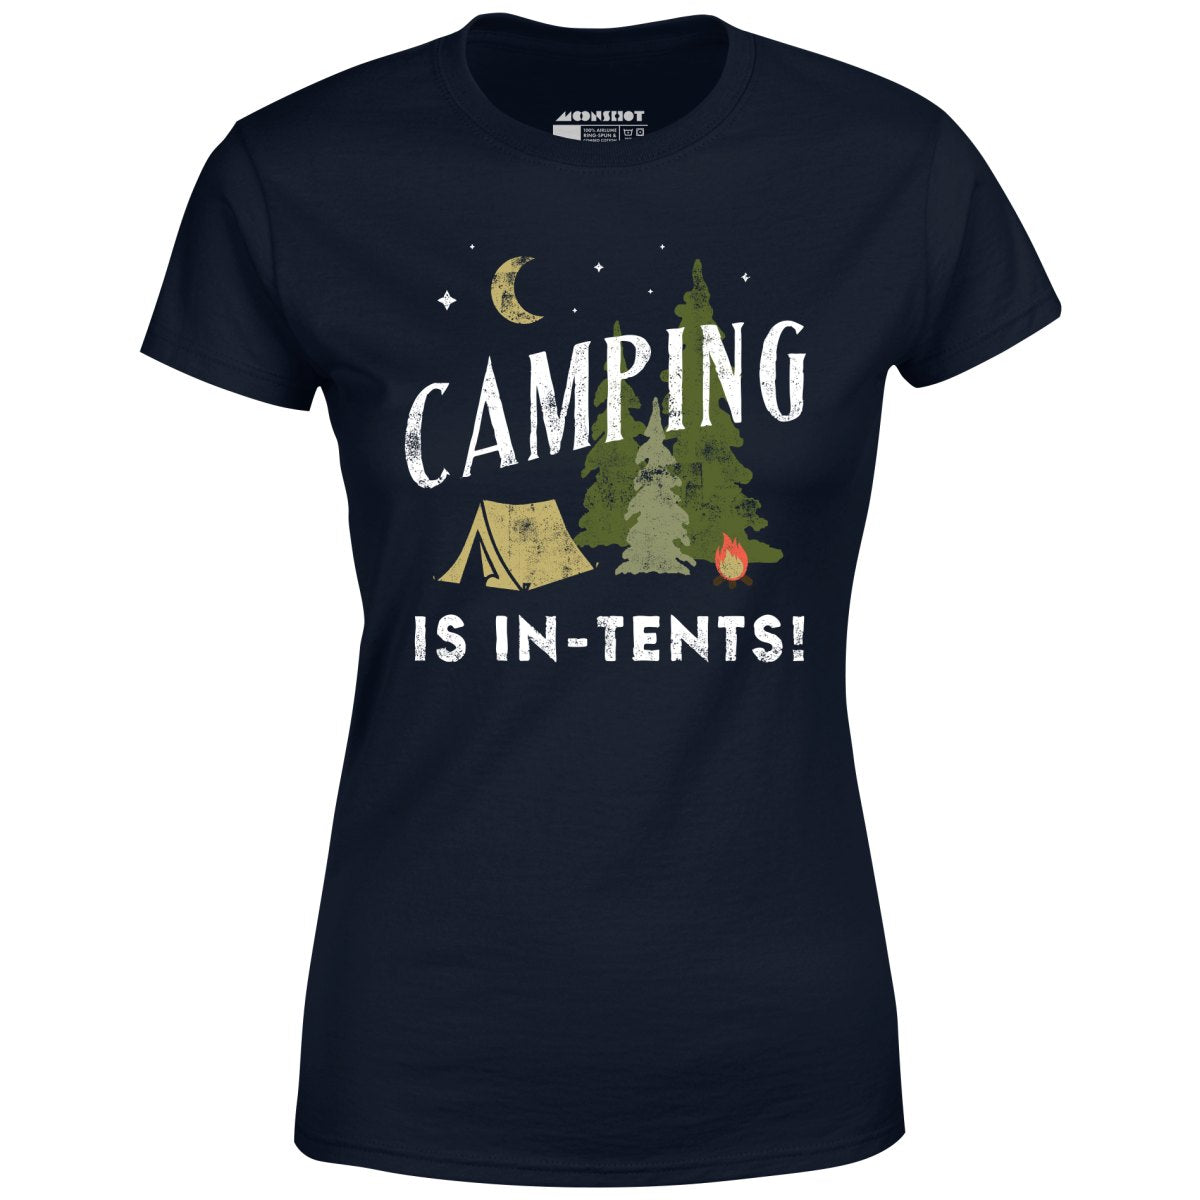 Camping is In-Tents - Women's T-Shirt